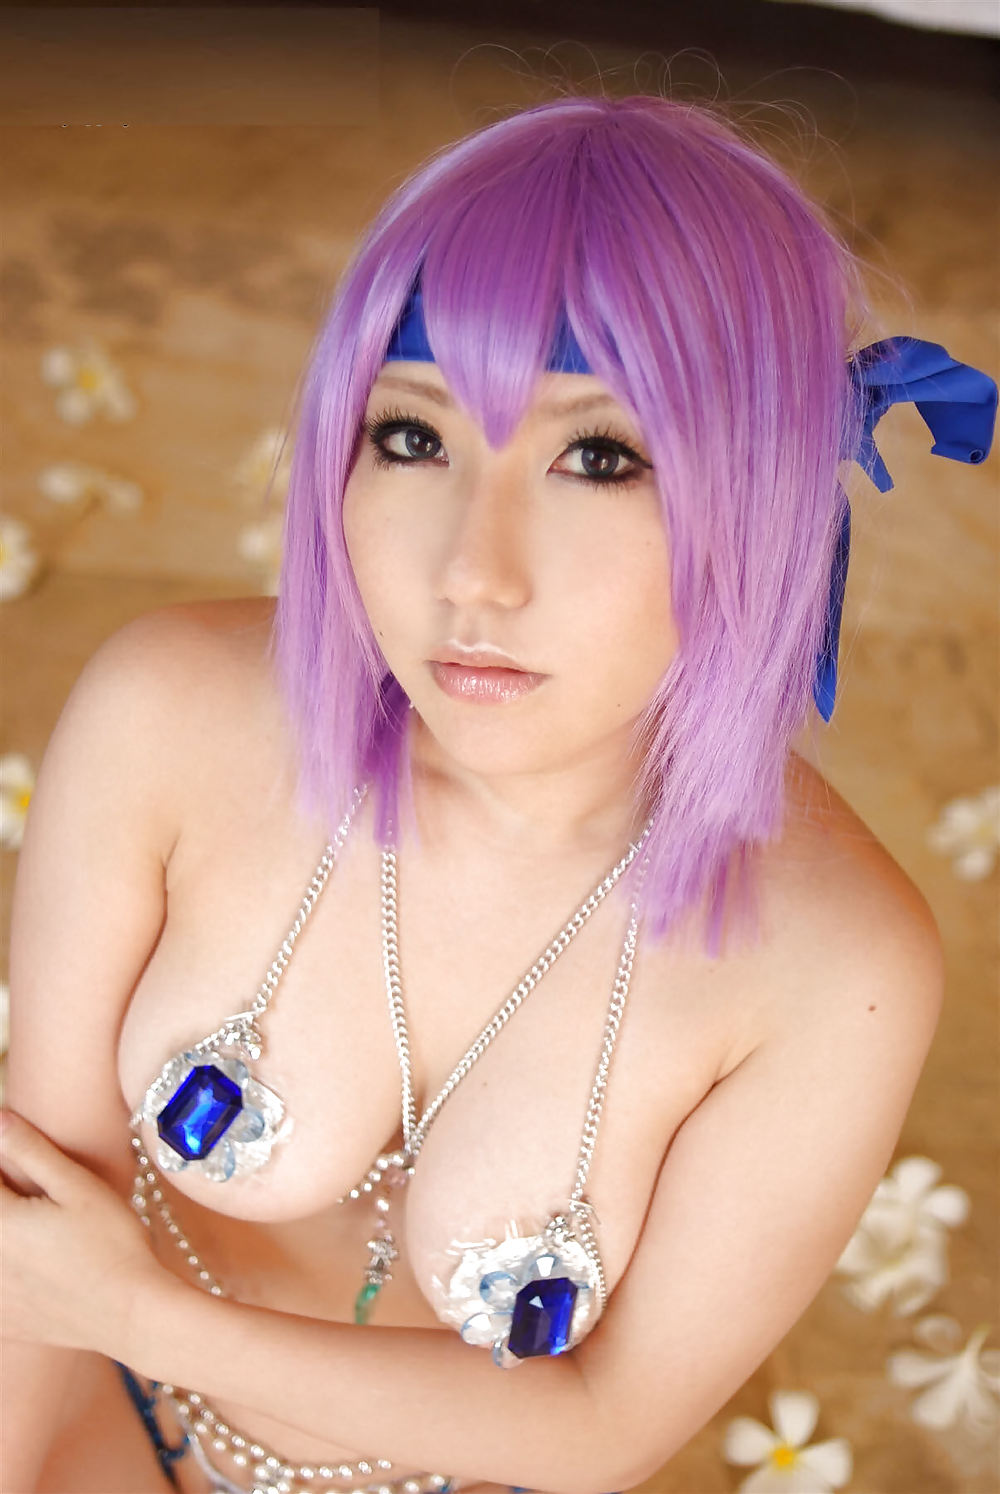 Giapponese cosplay cuties-ayane (doax) (1)
 #5263588